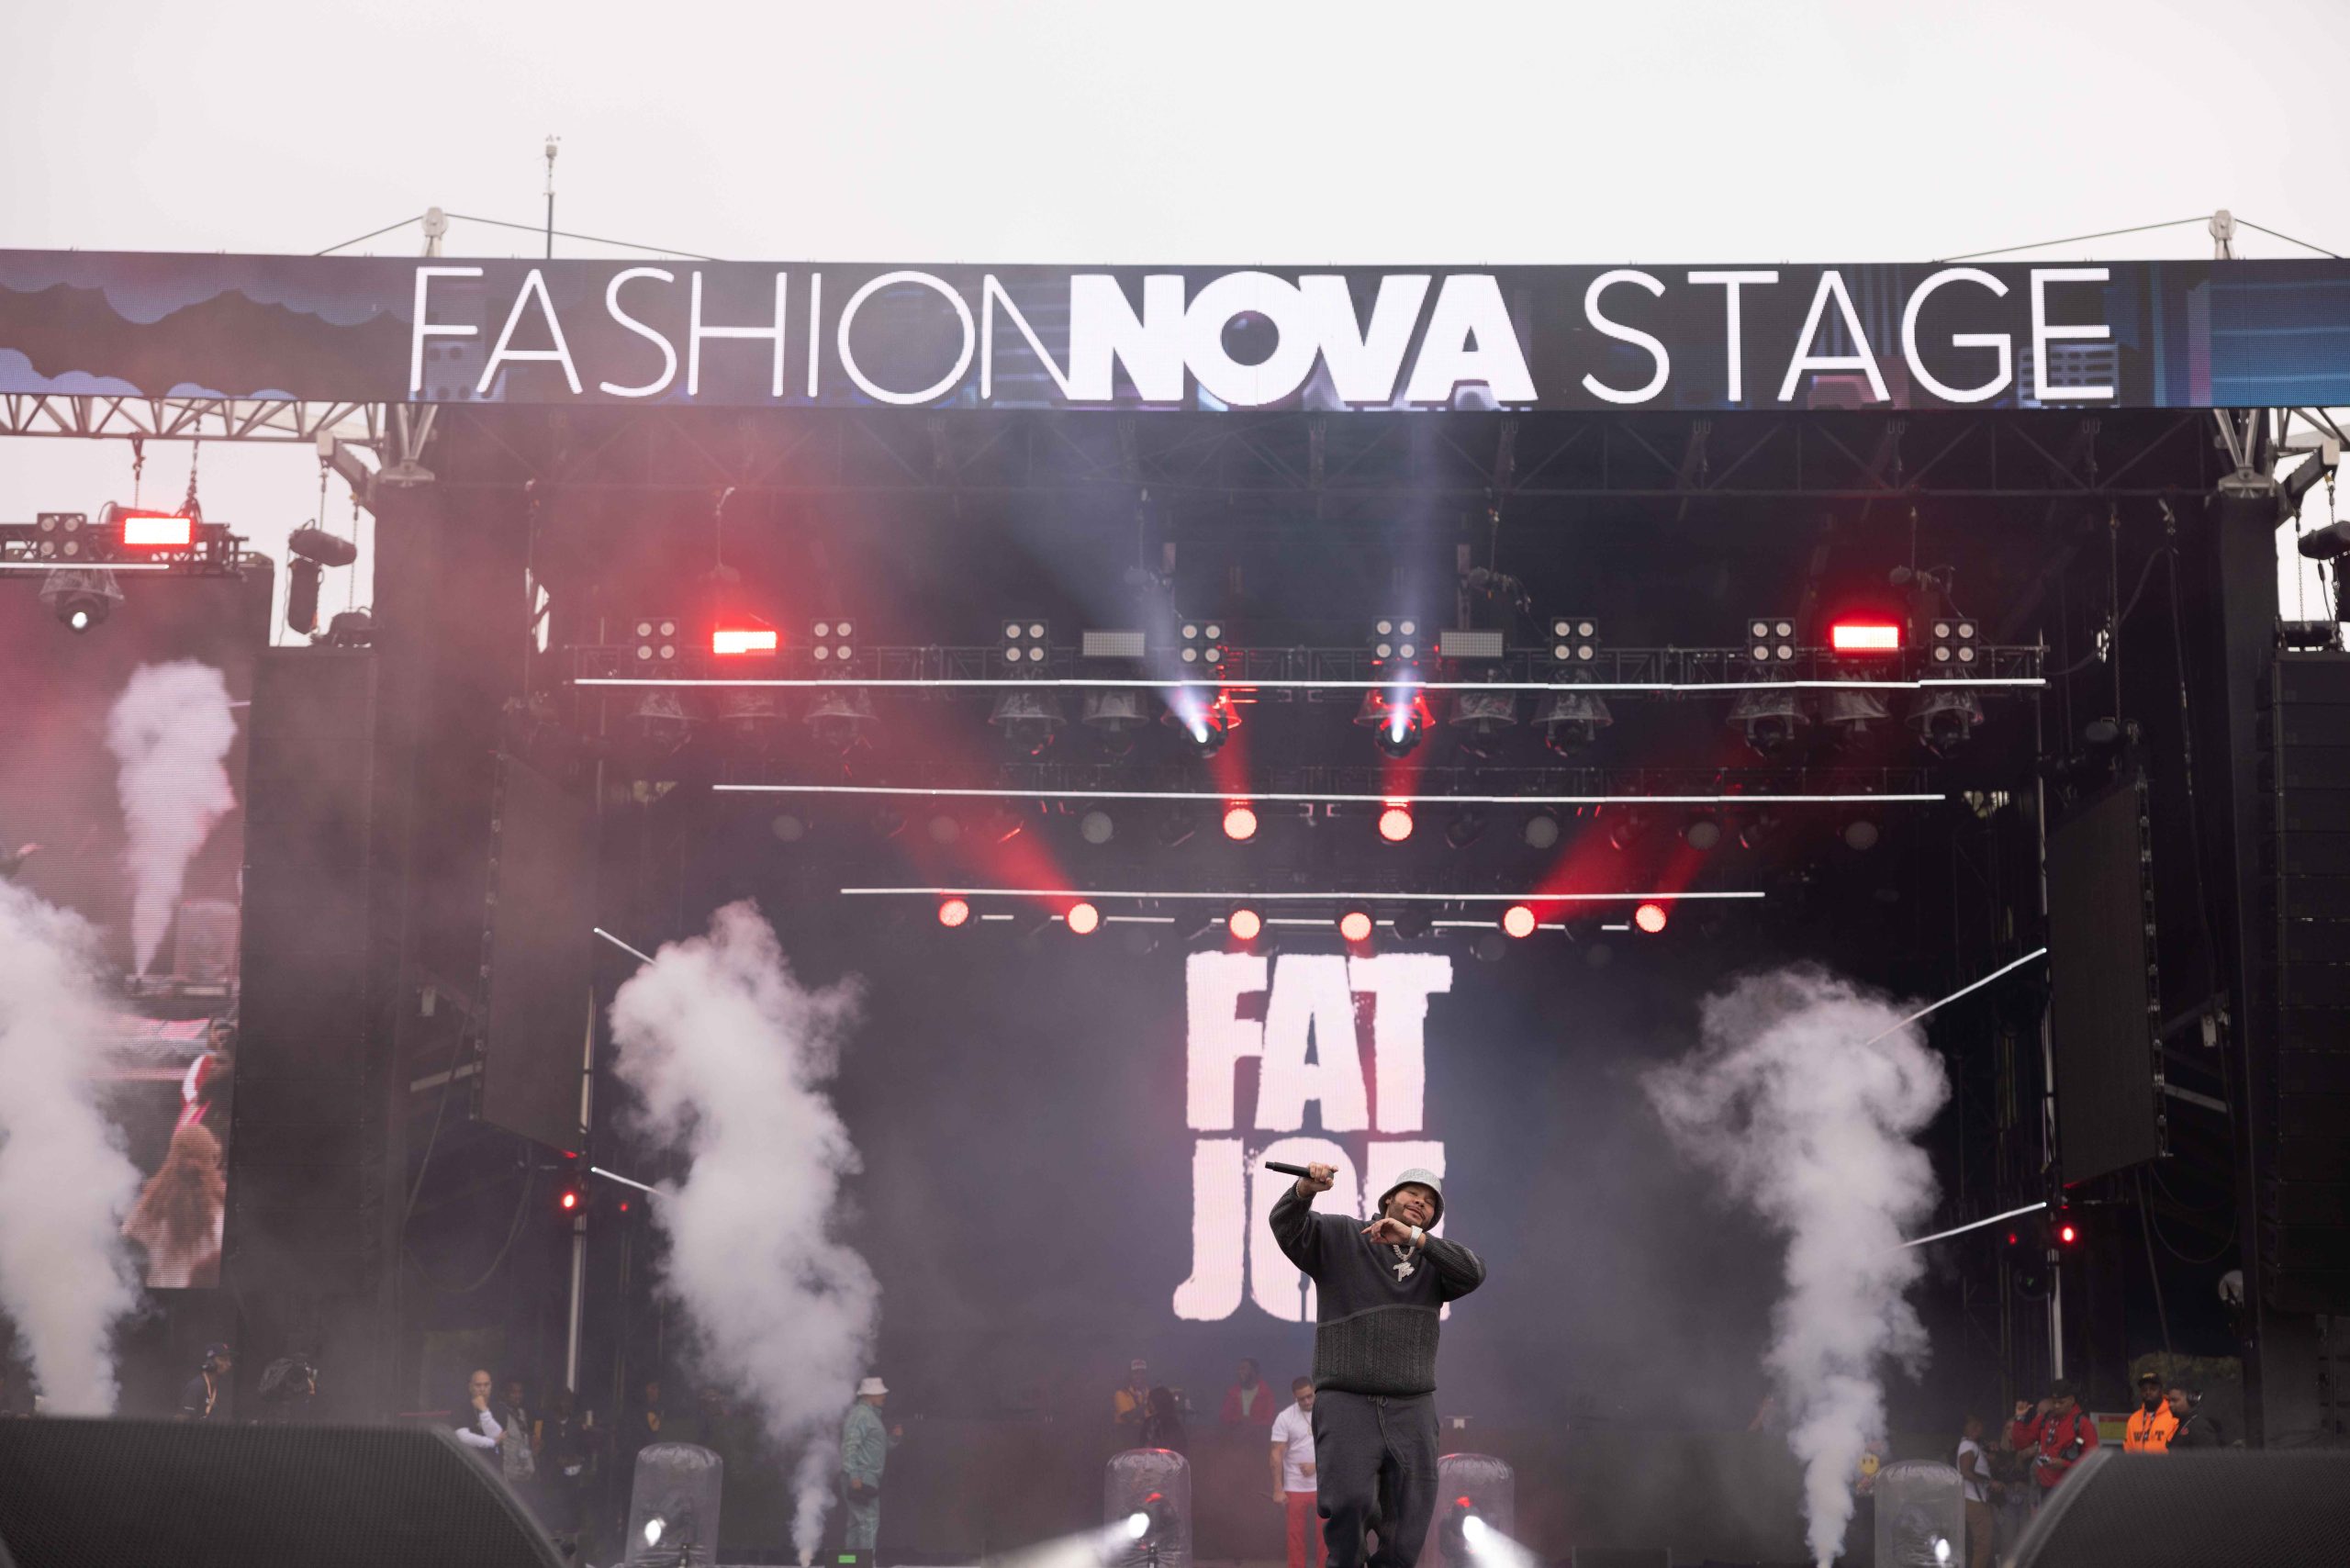 Fat Joe performs at the Fashion Nova Stage at Rolling Loud New York 2022 at Citi Field in Queens, New York on Sunday, September 25. PHOTO CREDIT: Meraki House for Fashion Nova